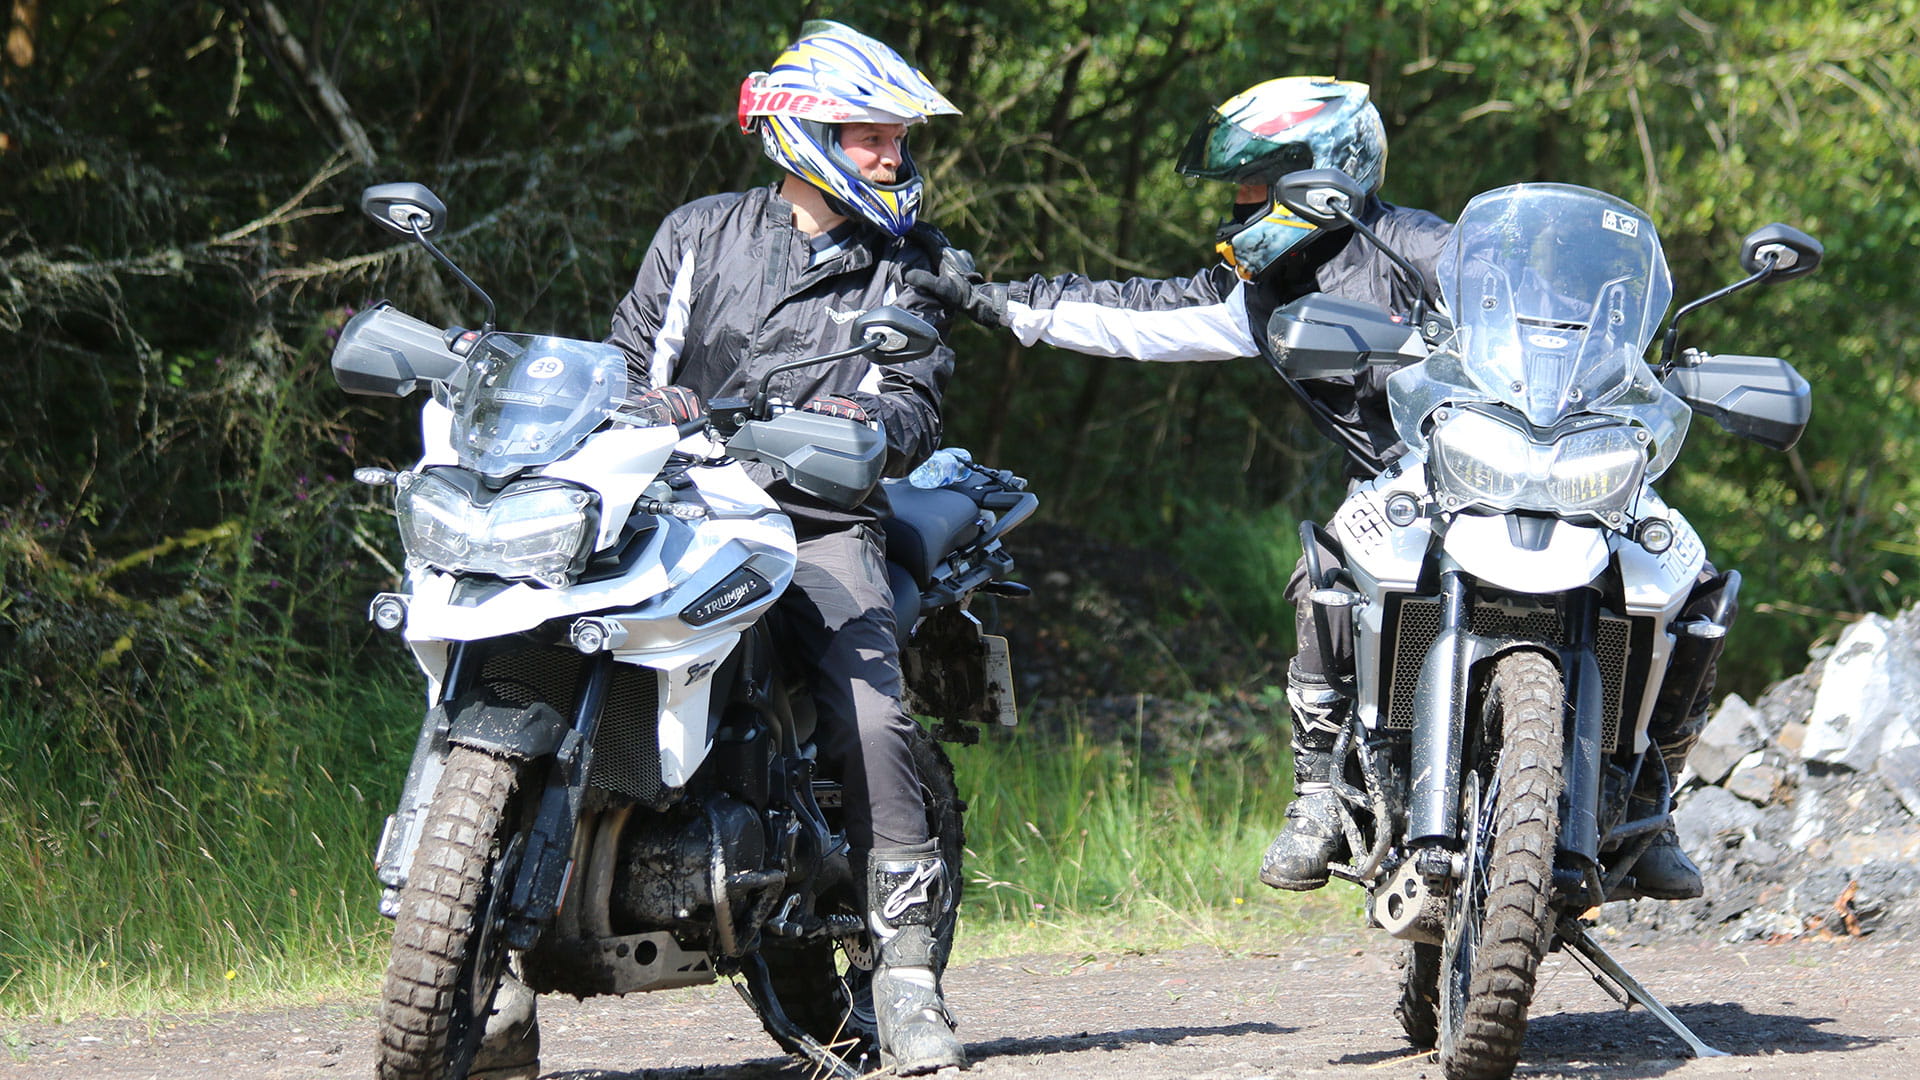 Satisfied riders on The Triumph Tiger 800 and 1200